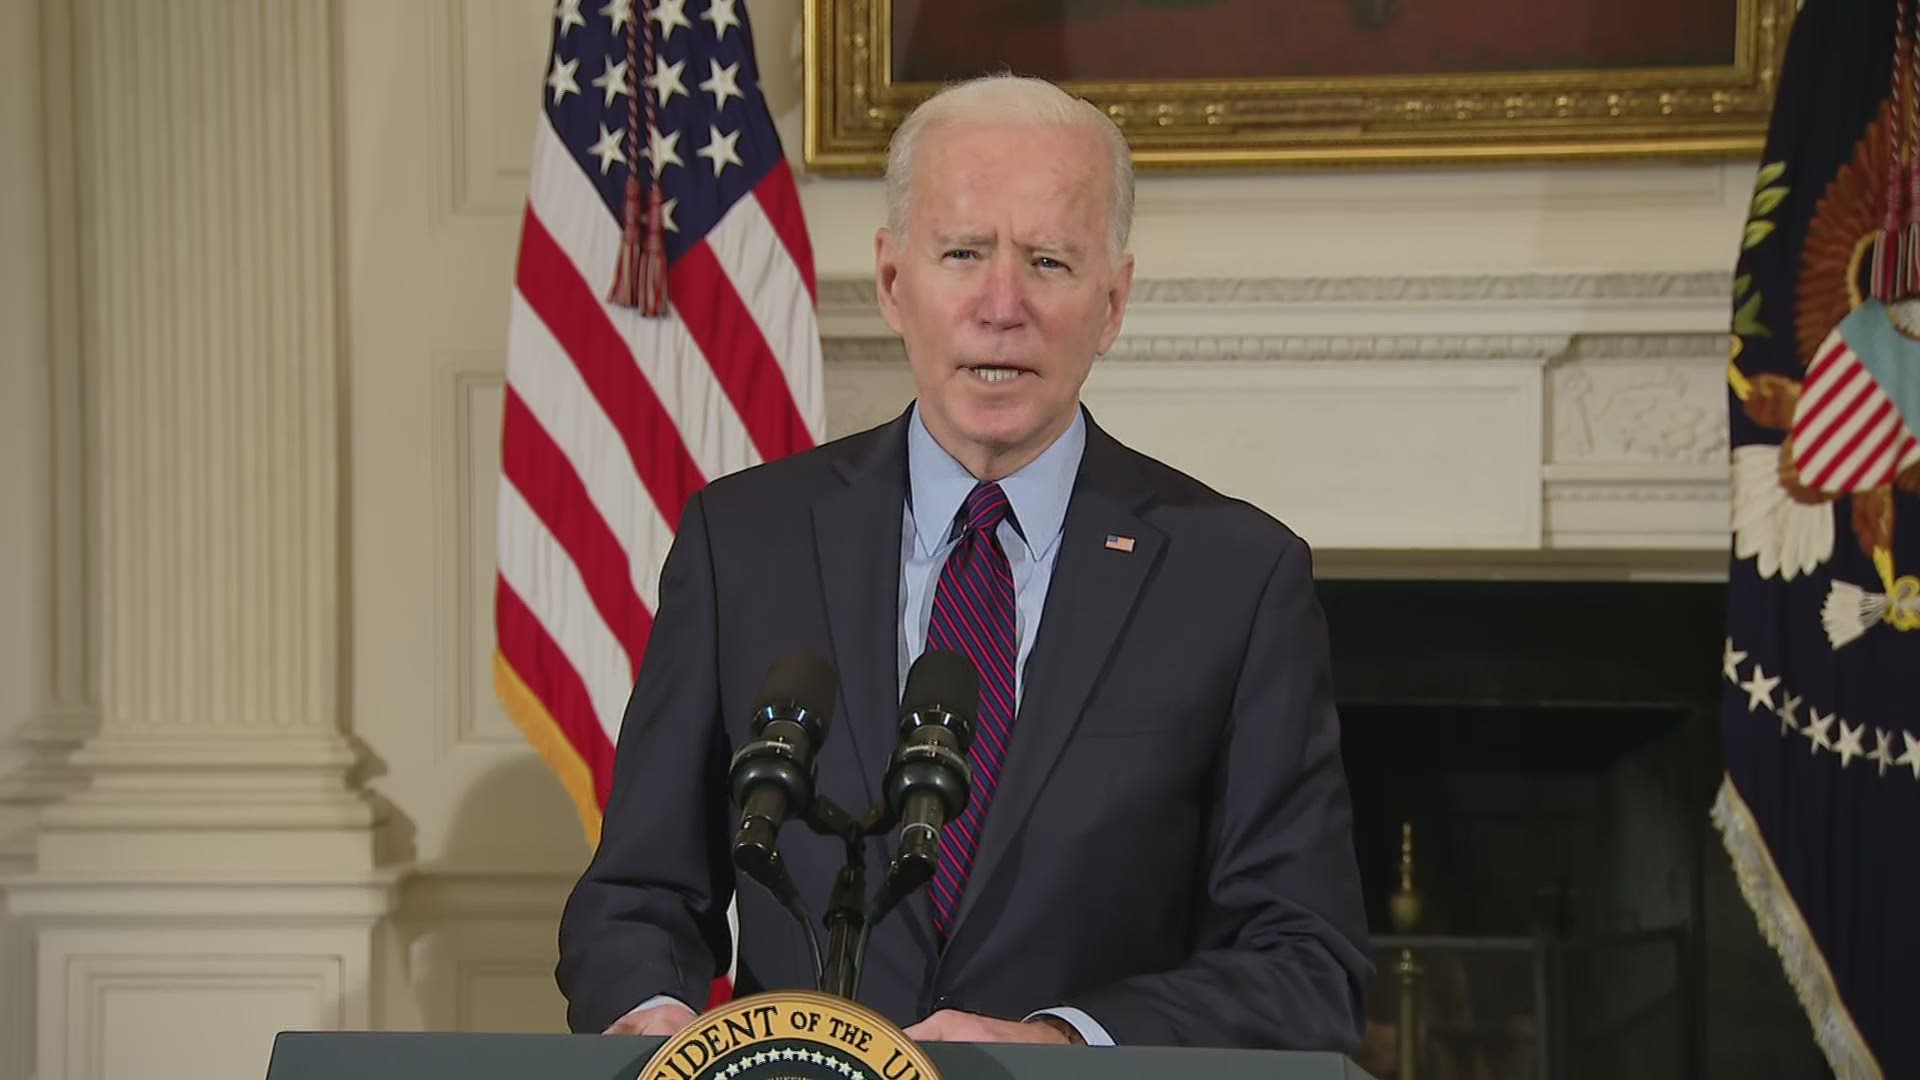 President Joe Biden delivered remarks on the state of the economy and the need for the American Rescue Plan